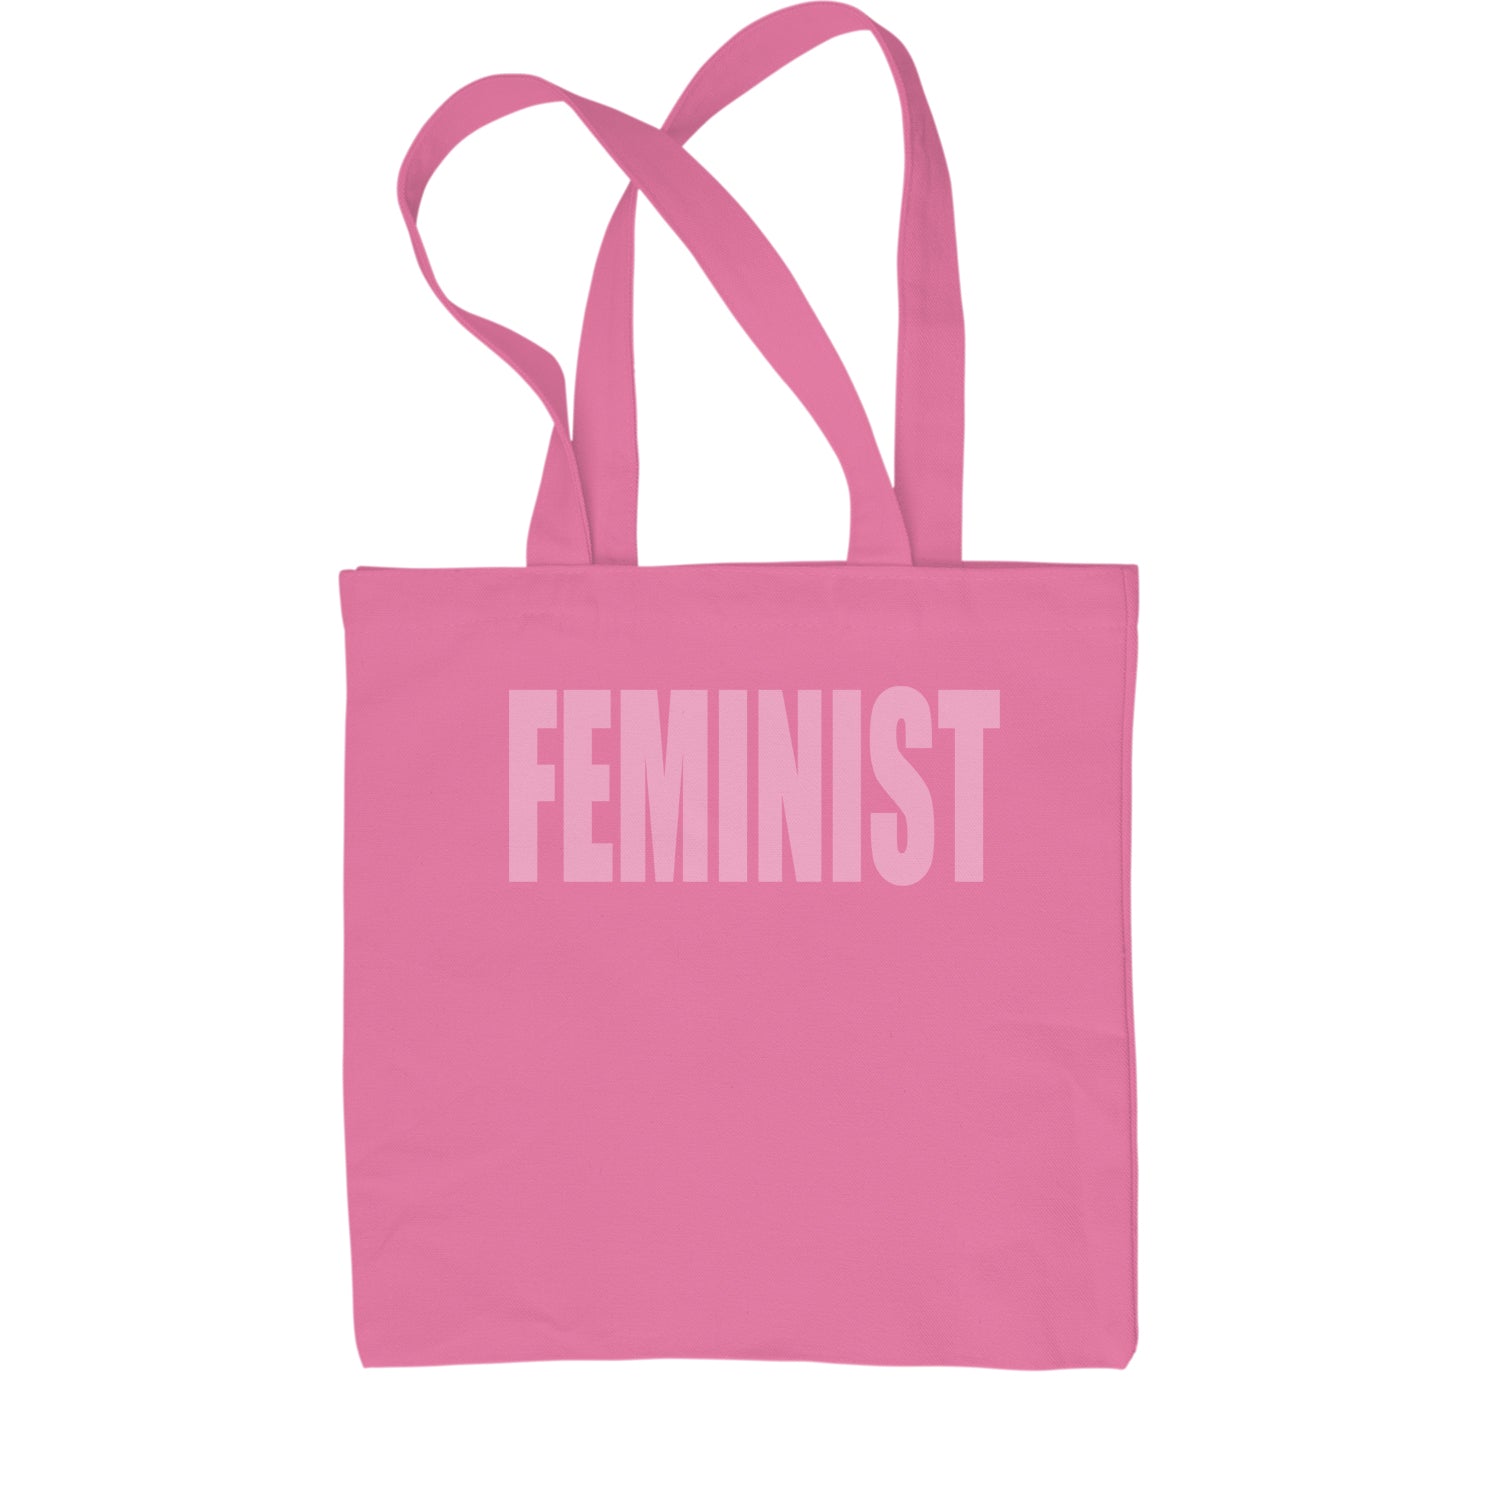 Feminist (Pink Print) Shopping Tote Bag a, equal, equality, feminism, feminist, gender, is, lgbtq, like, looks, nevertheless, pay, persisted, rights, she, this, what by Expression Tees